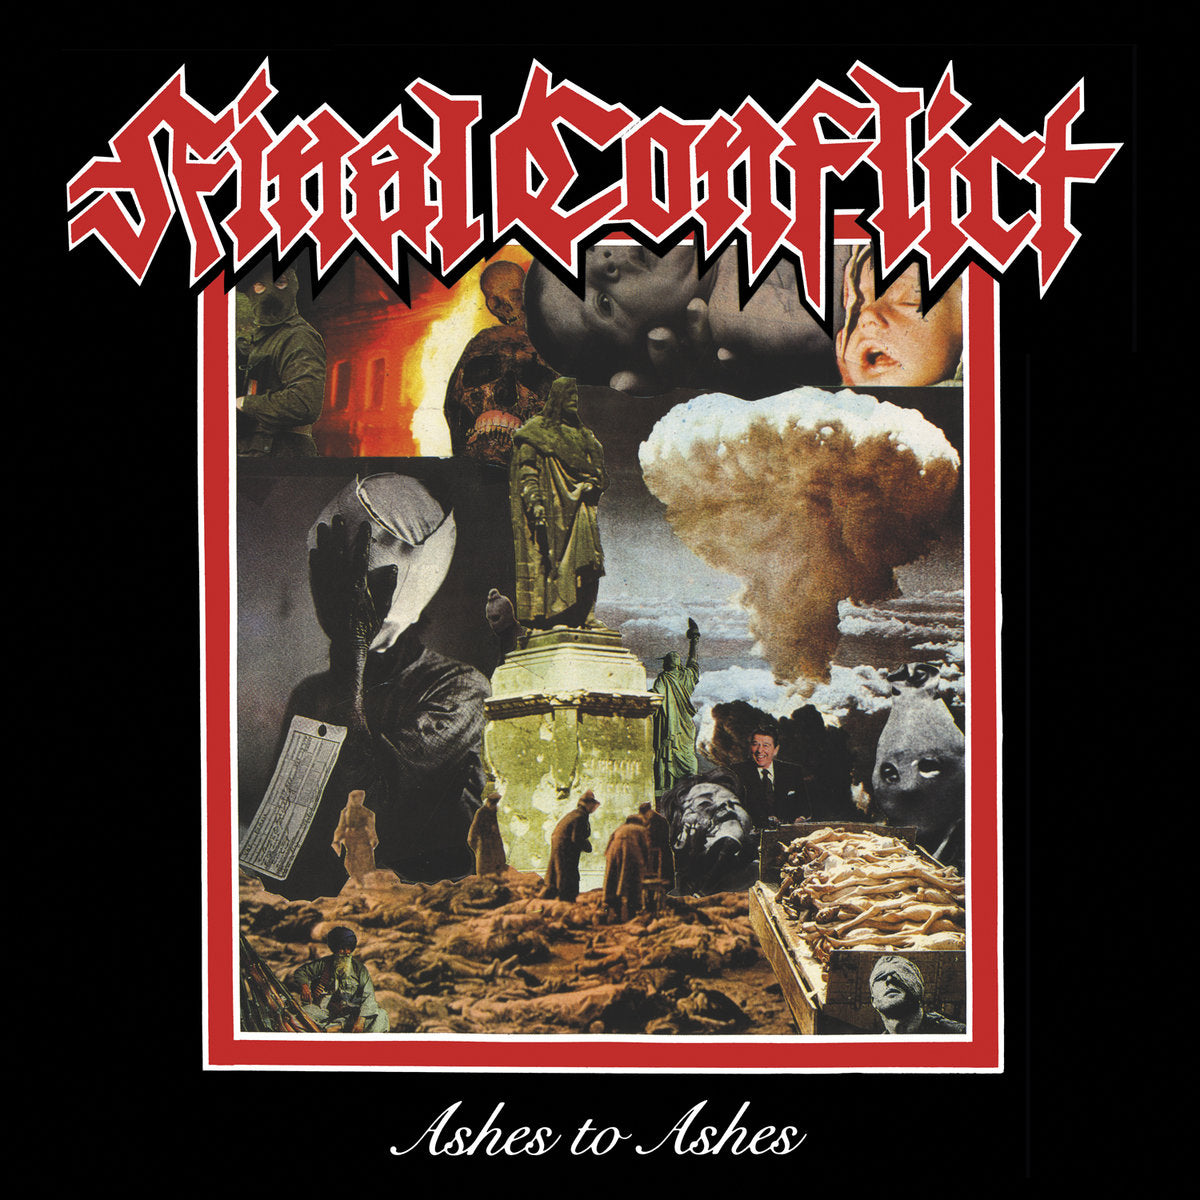 Final Conflict "Ashes To Ashes" LP